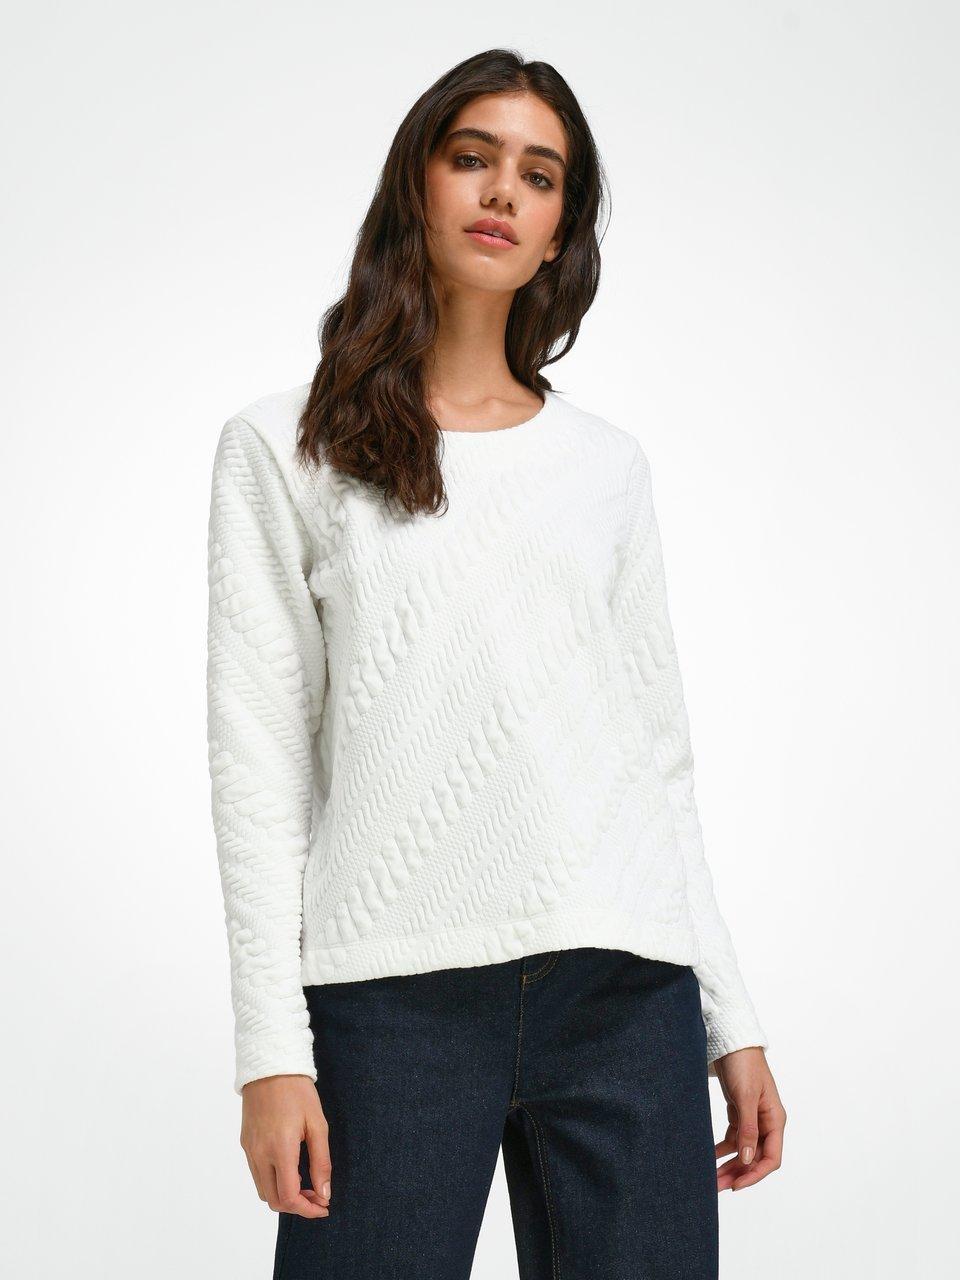 mayfair by Peter Hahn - Le sweatshirt manches longues